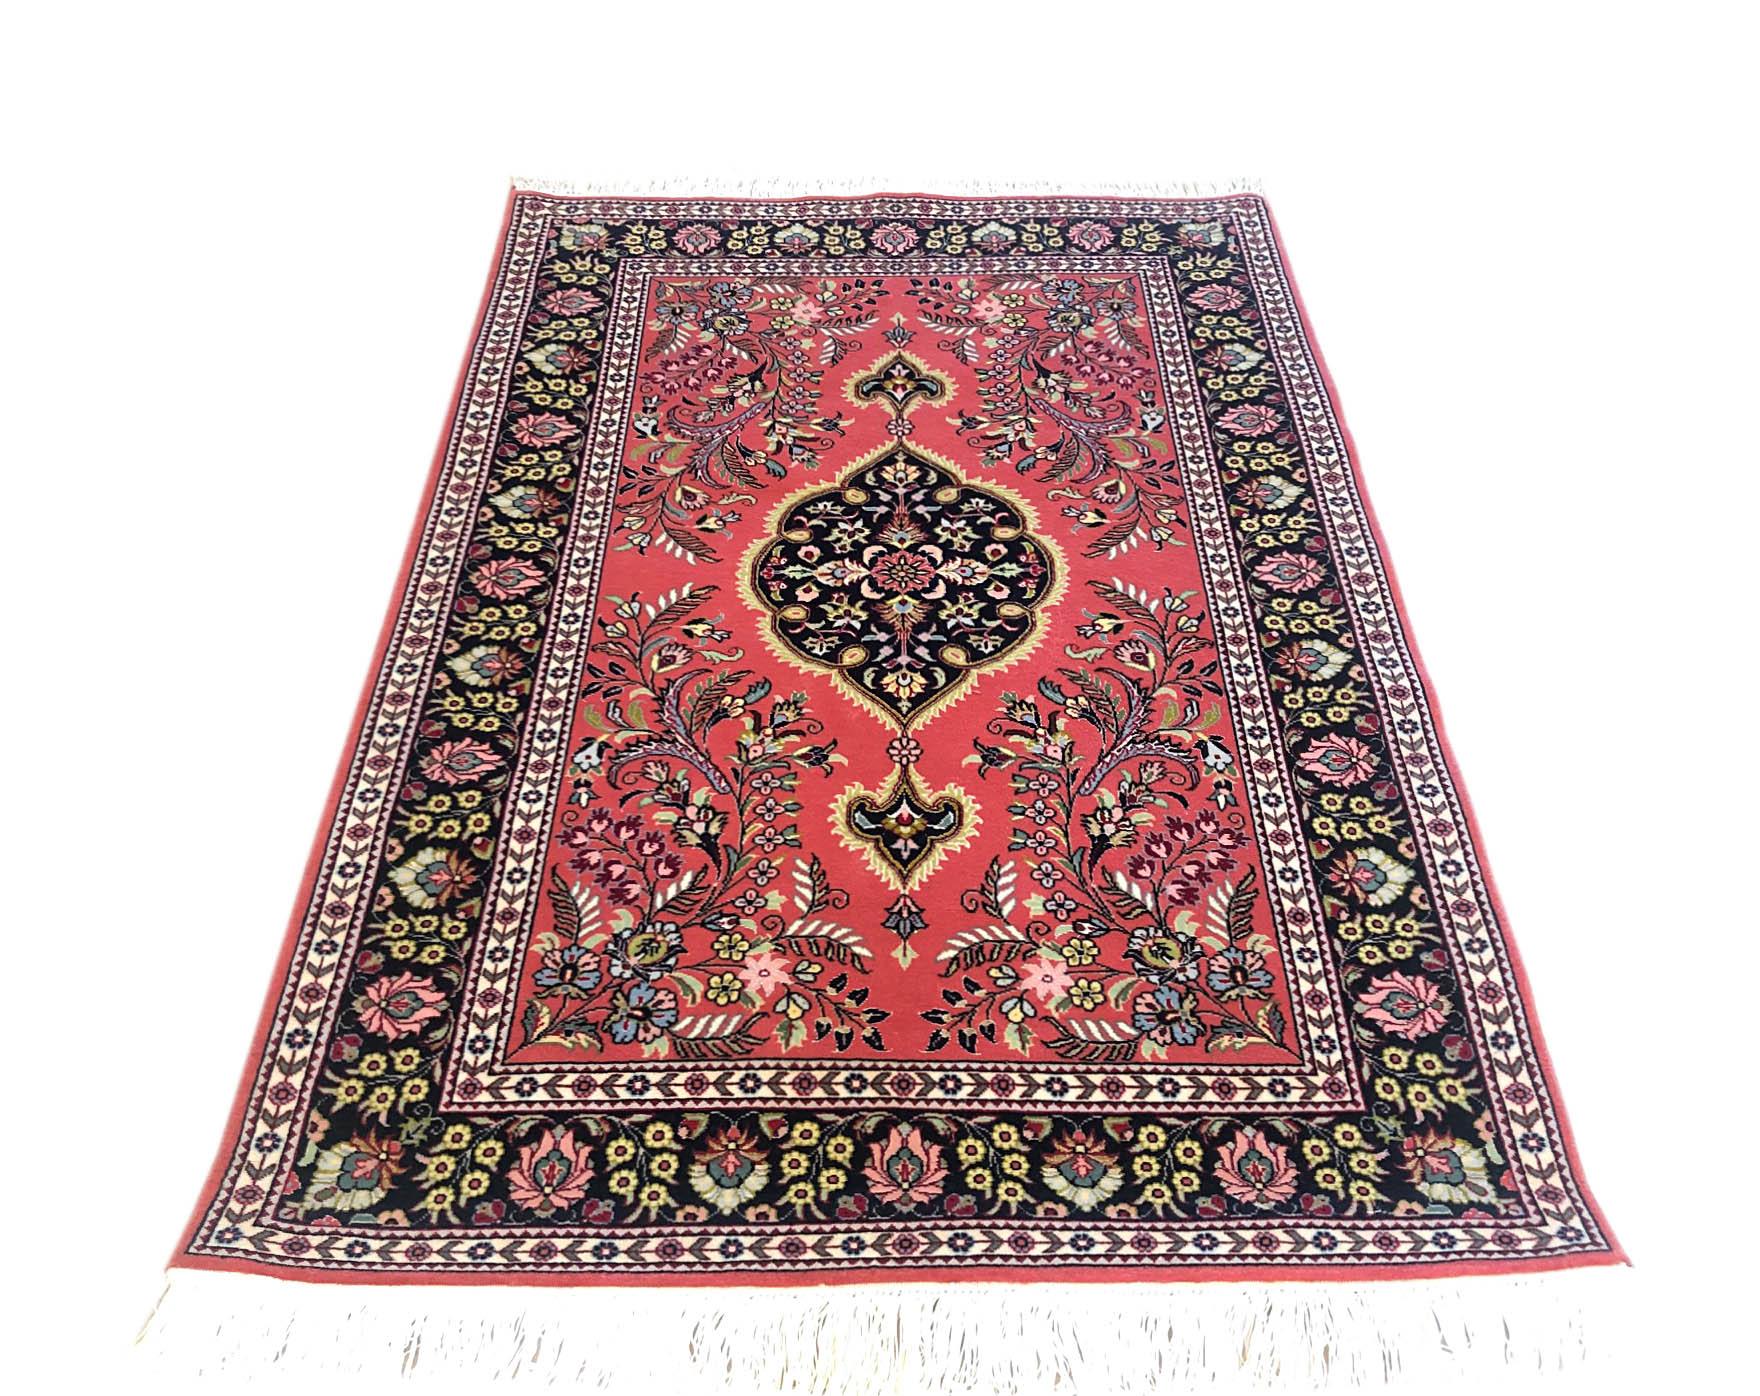 This Persian Tabriz rug has wool and silk pile and cotton foundation. This rug has a medallion floral design with salmon pink base color and black border. The size is 2 feet 11 inches wide and 4 feet 5 inch long. The colors as well as the